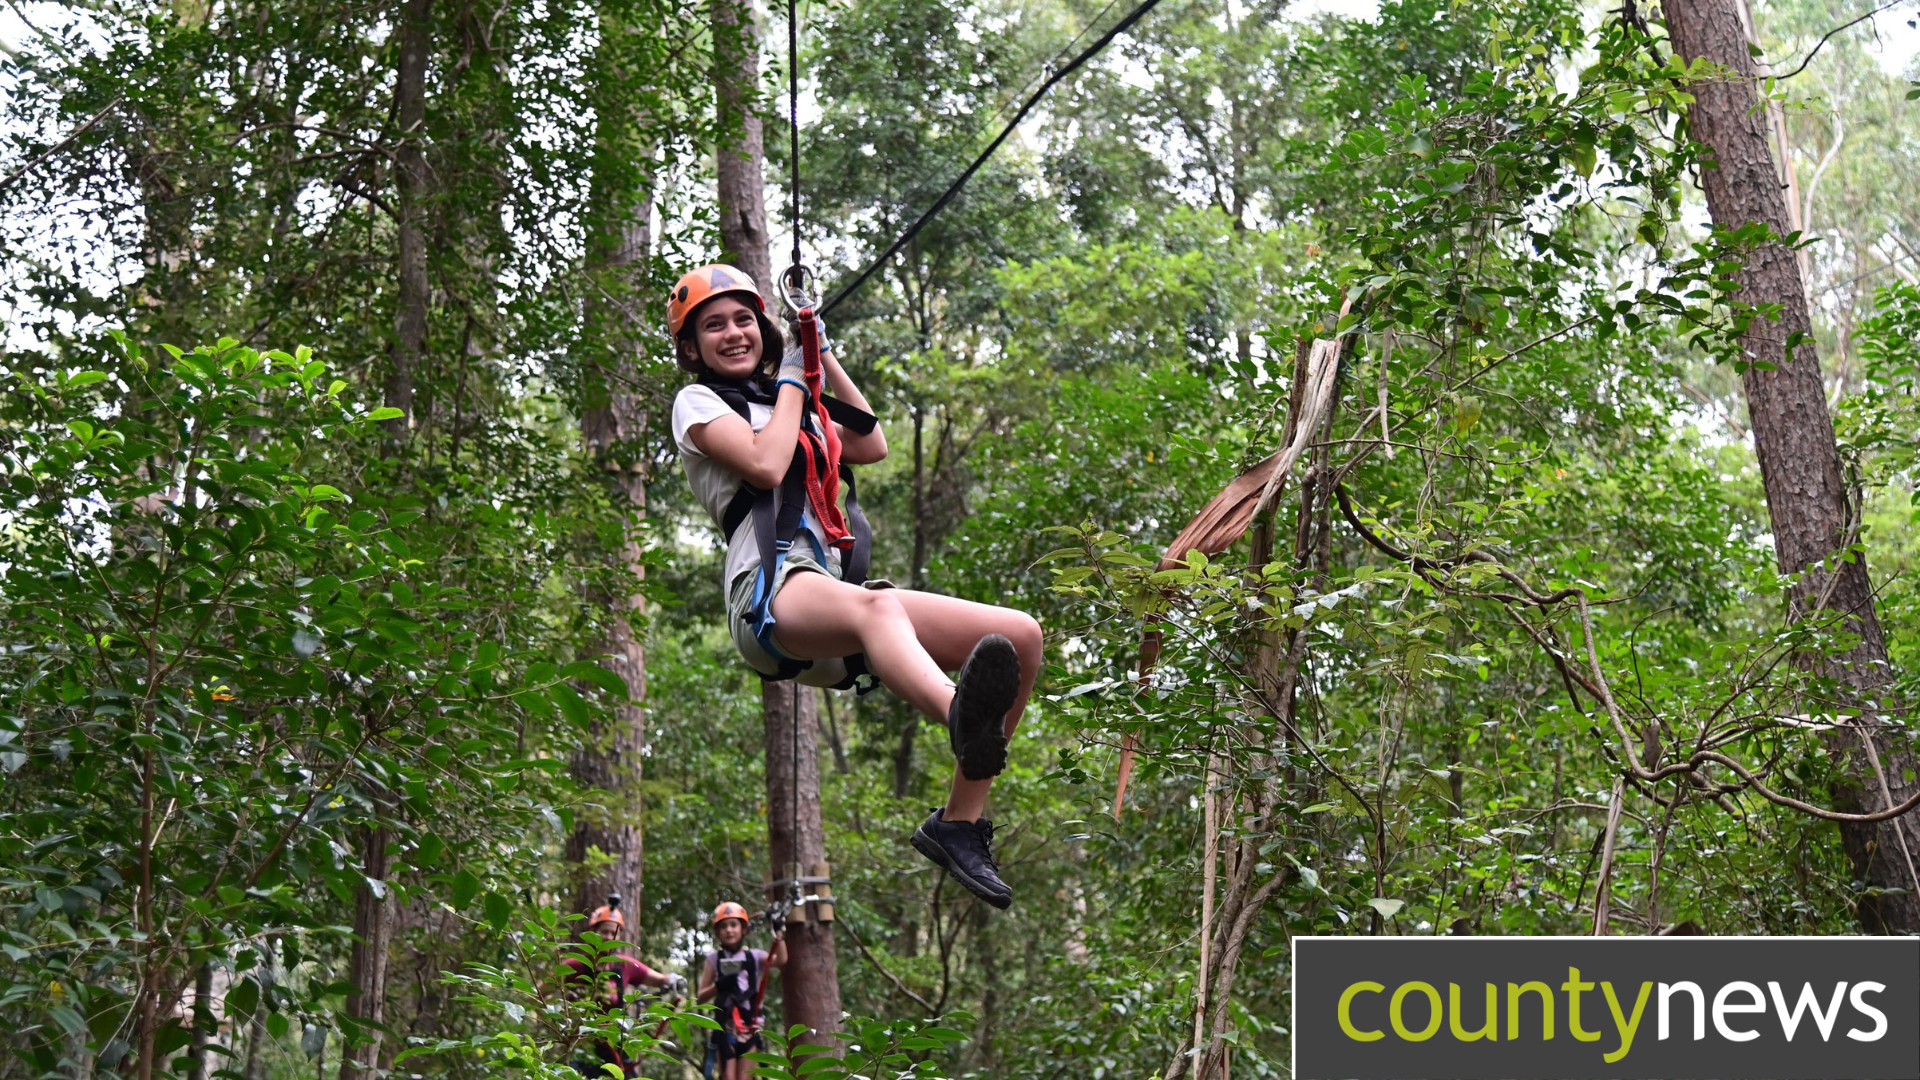 A woman zip lines through the woods